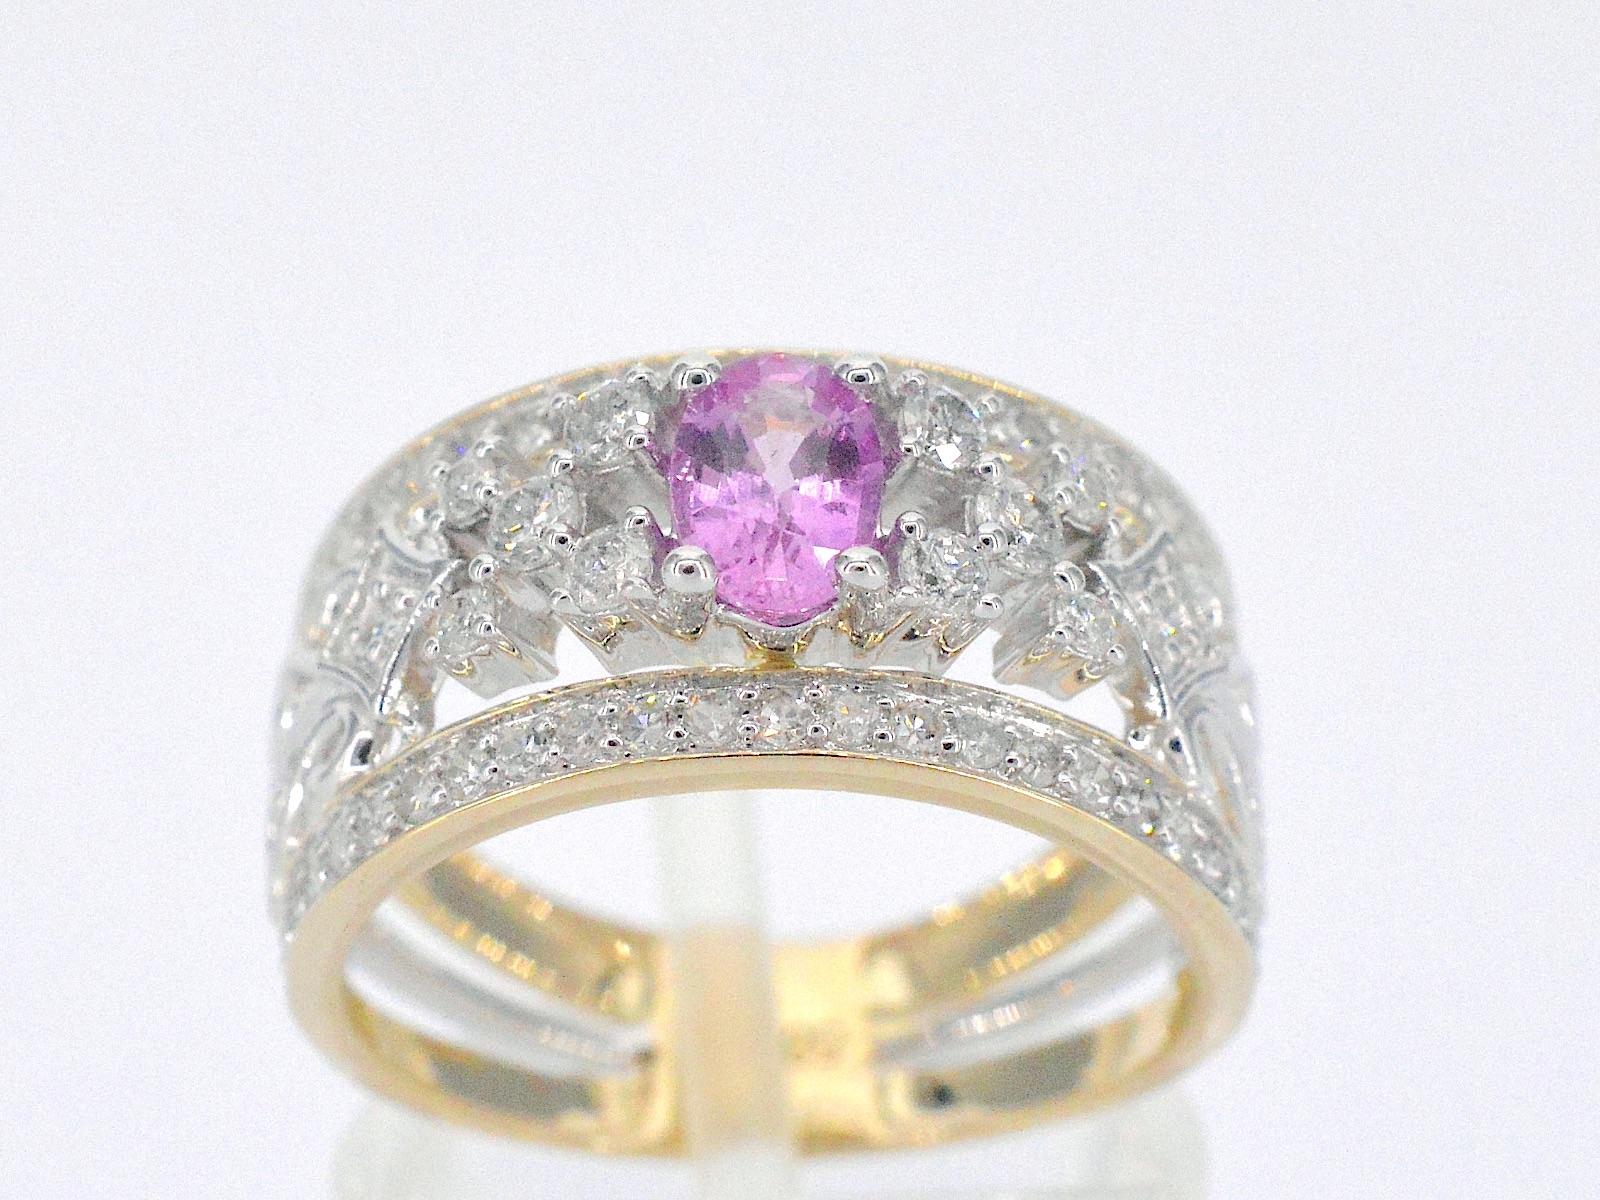 This 14K gold ring is an exclusive and luxurious piece of jewelry, adorned with a stunning pink sapphire and numerous sparkling diamonds. The gold is a high-quality metal that is known for its durability and lustrous properties. The diamonds are